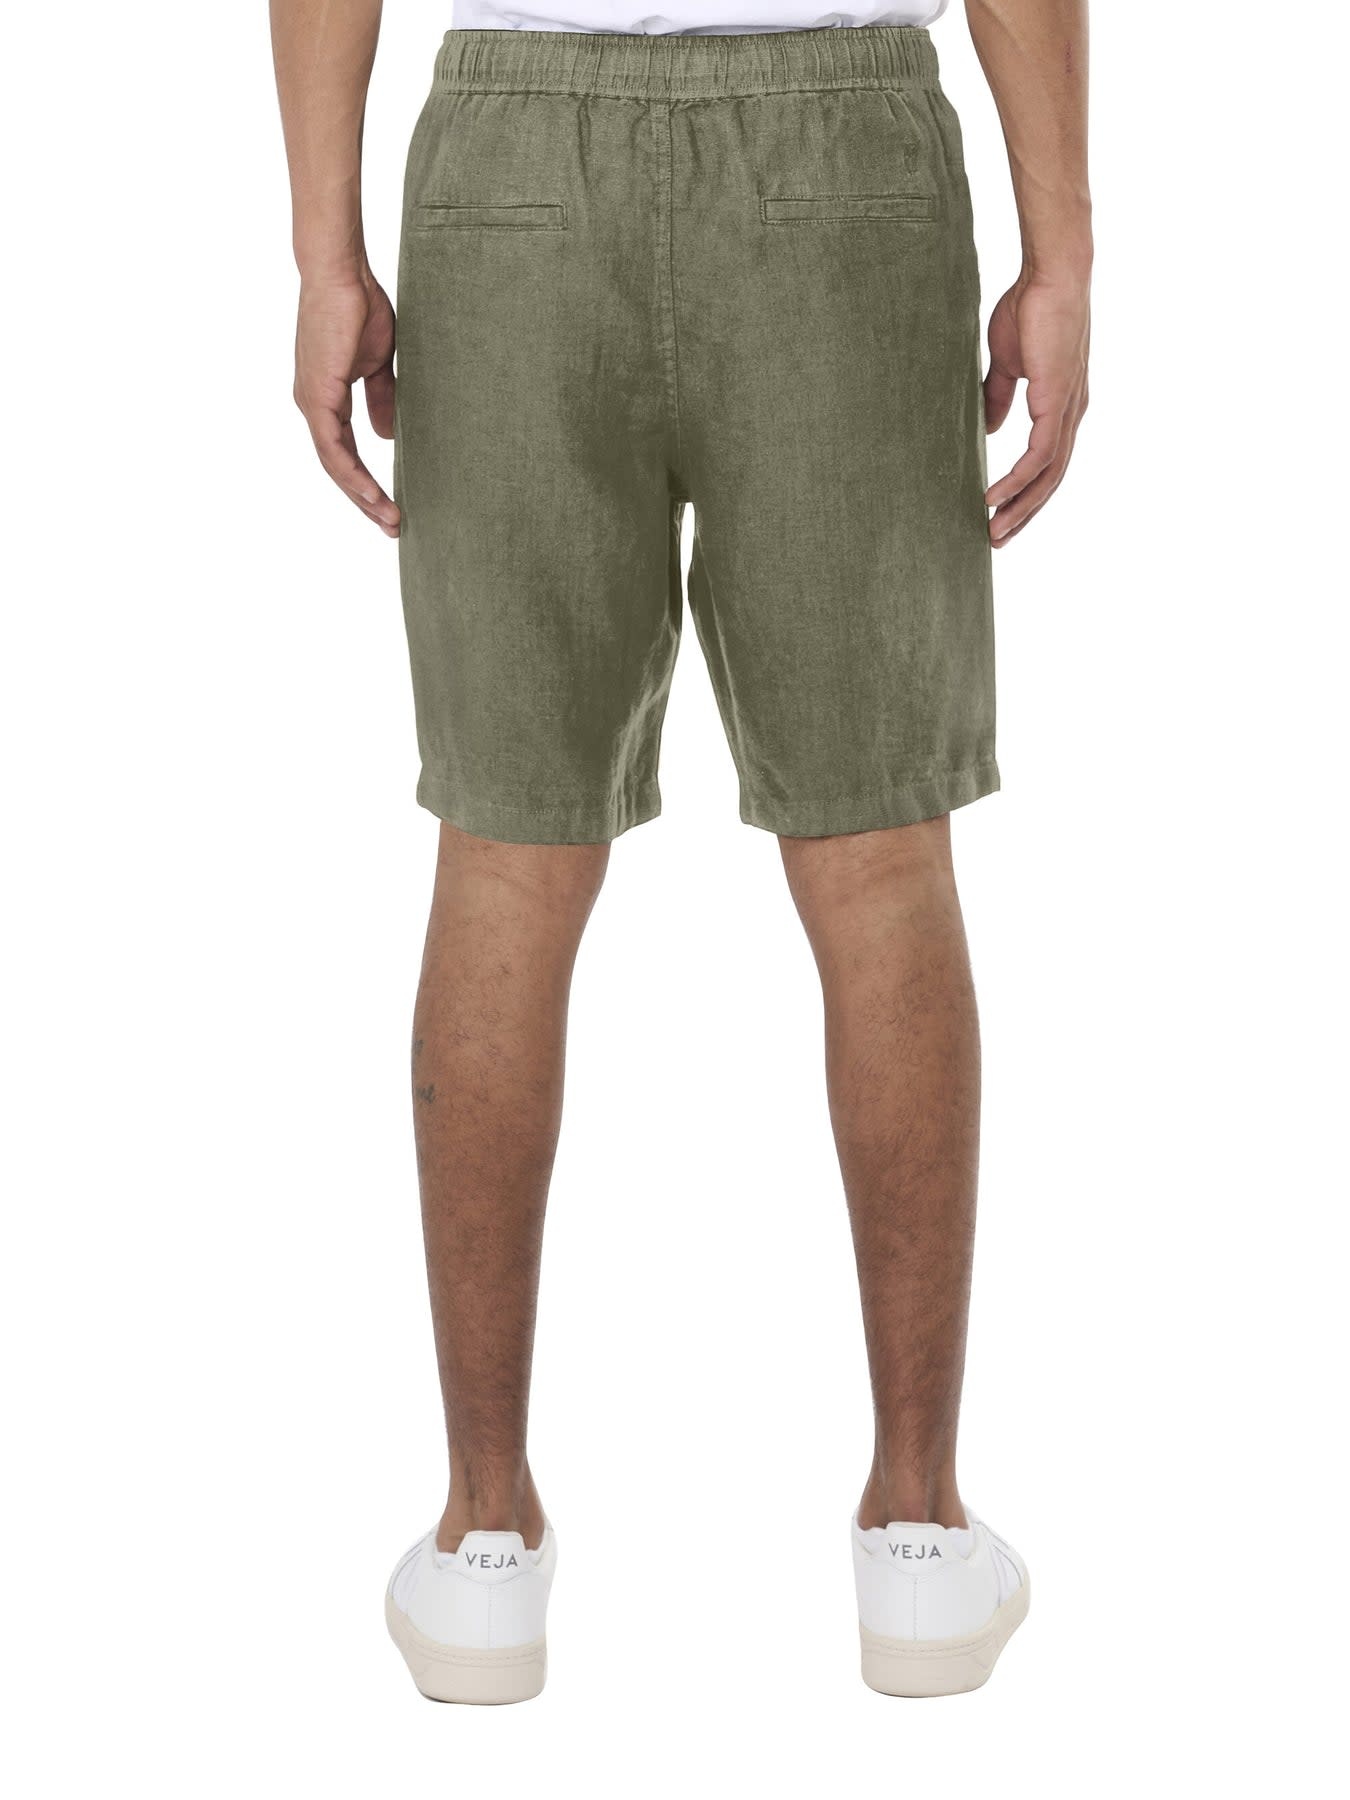 KnowledgeCotton Apparel KnowledgeCotton, Fig Loose Shorts, burned olive, XL